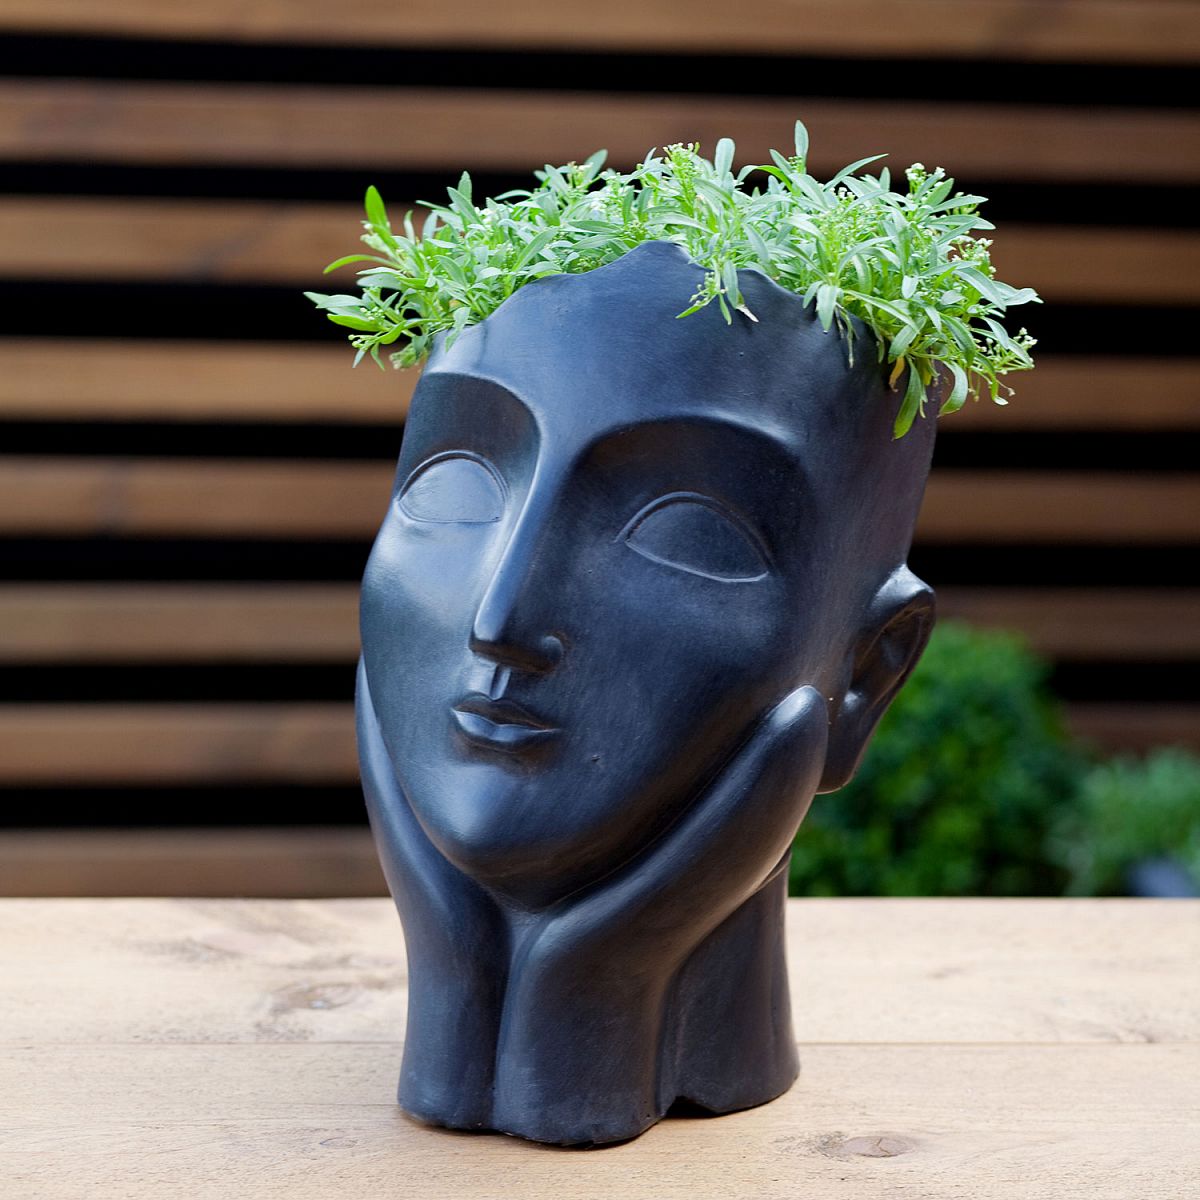 Oval Face Outdoor Plant Pot by Idealist Lite